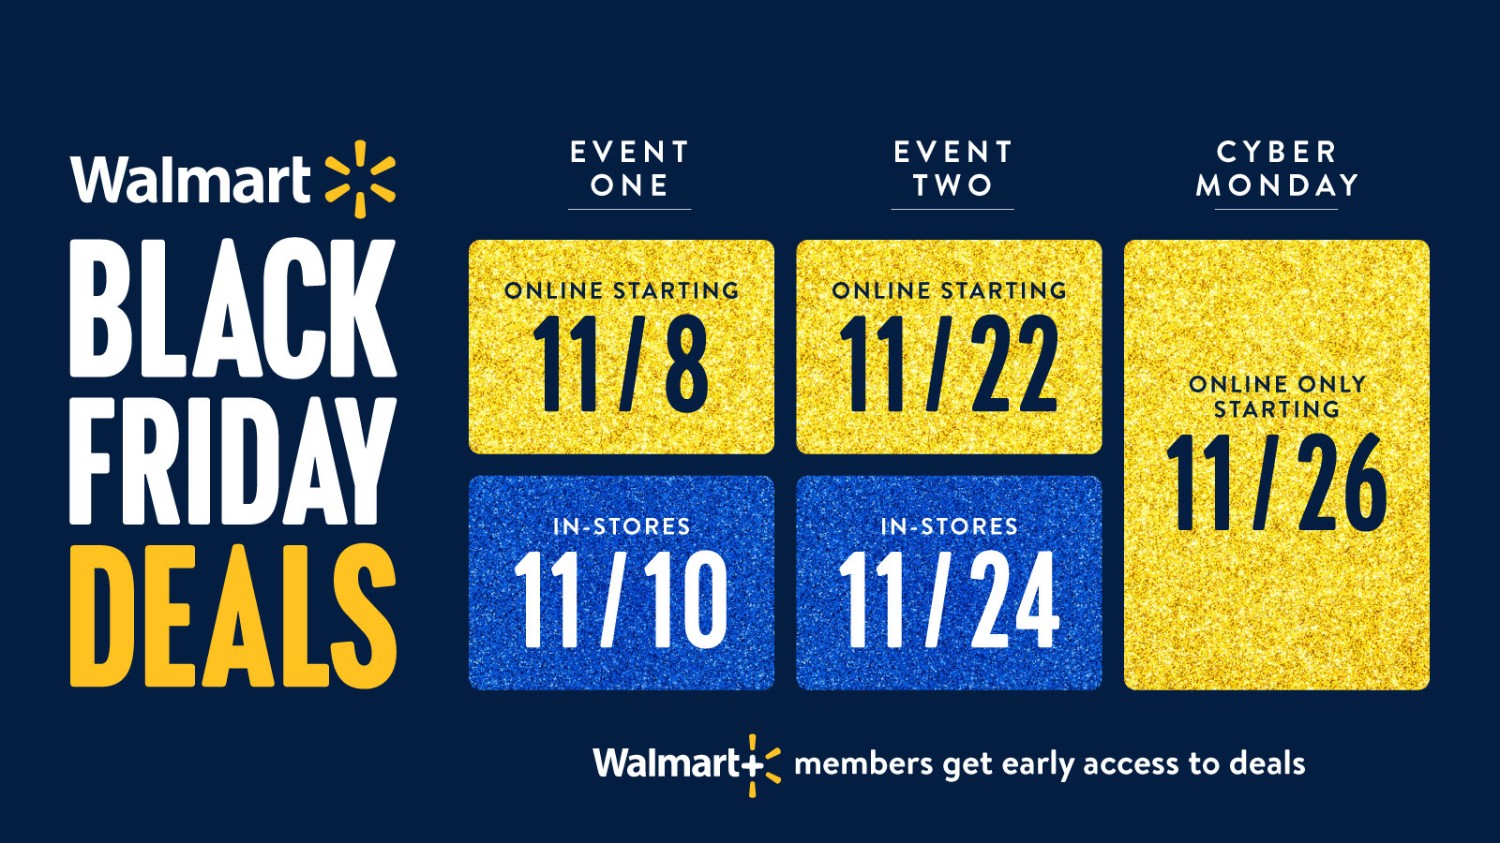 Walmart's “Black Friday Deals” Are Back With Major Savings and